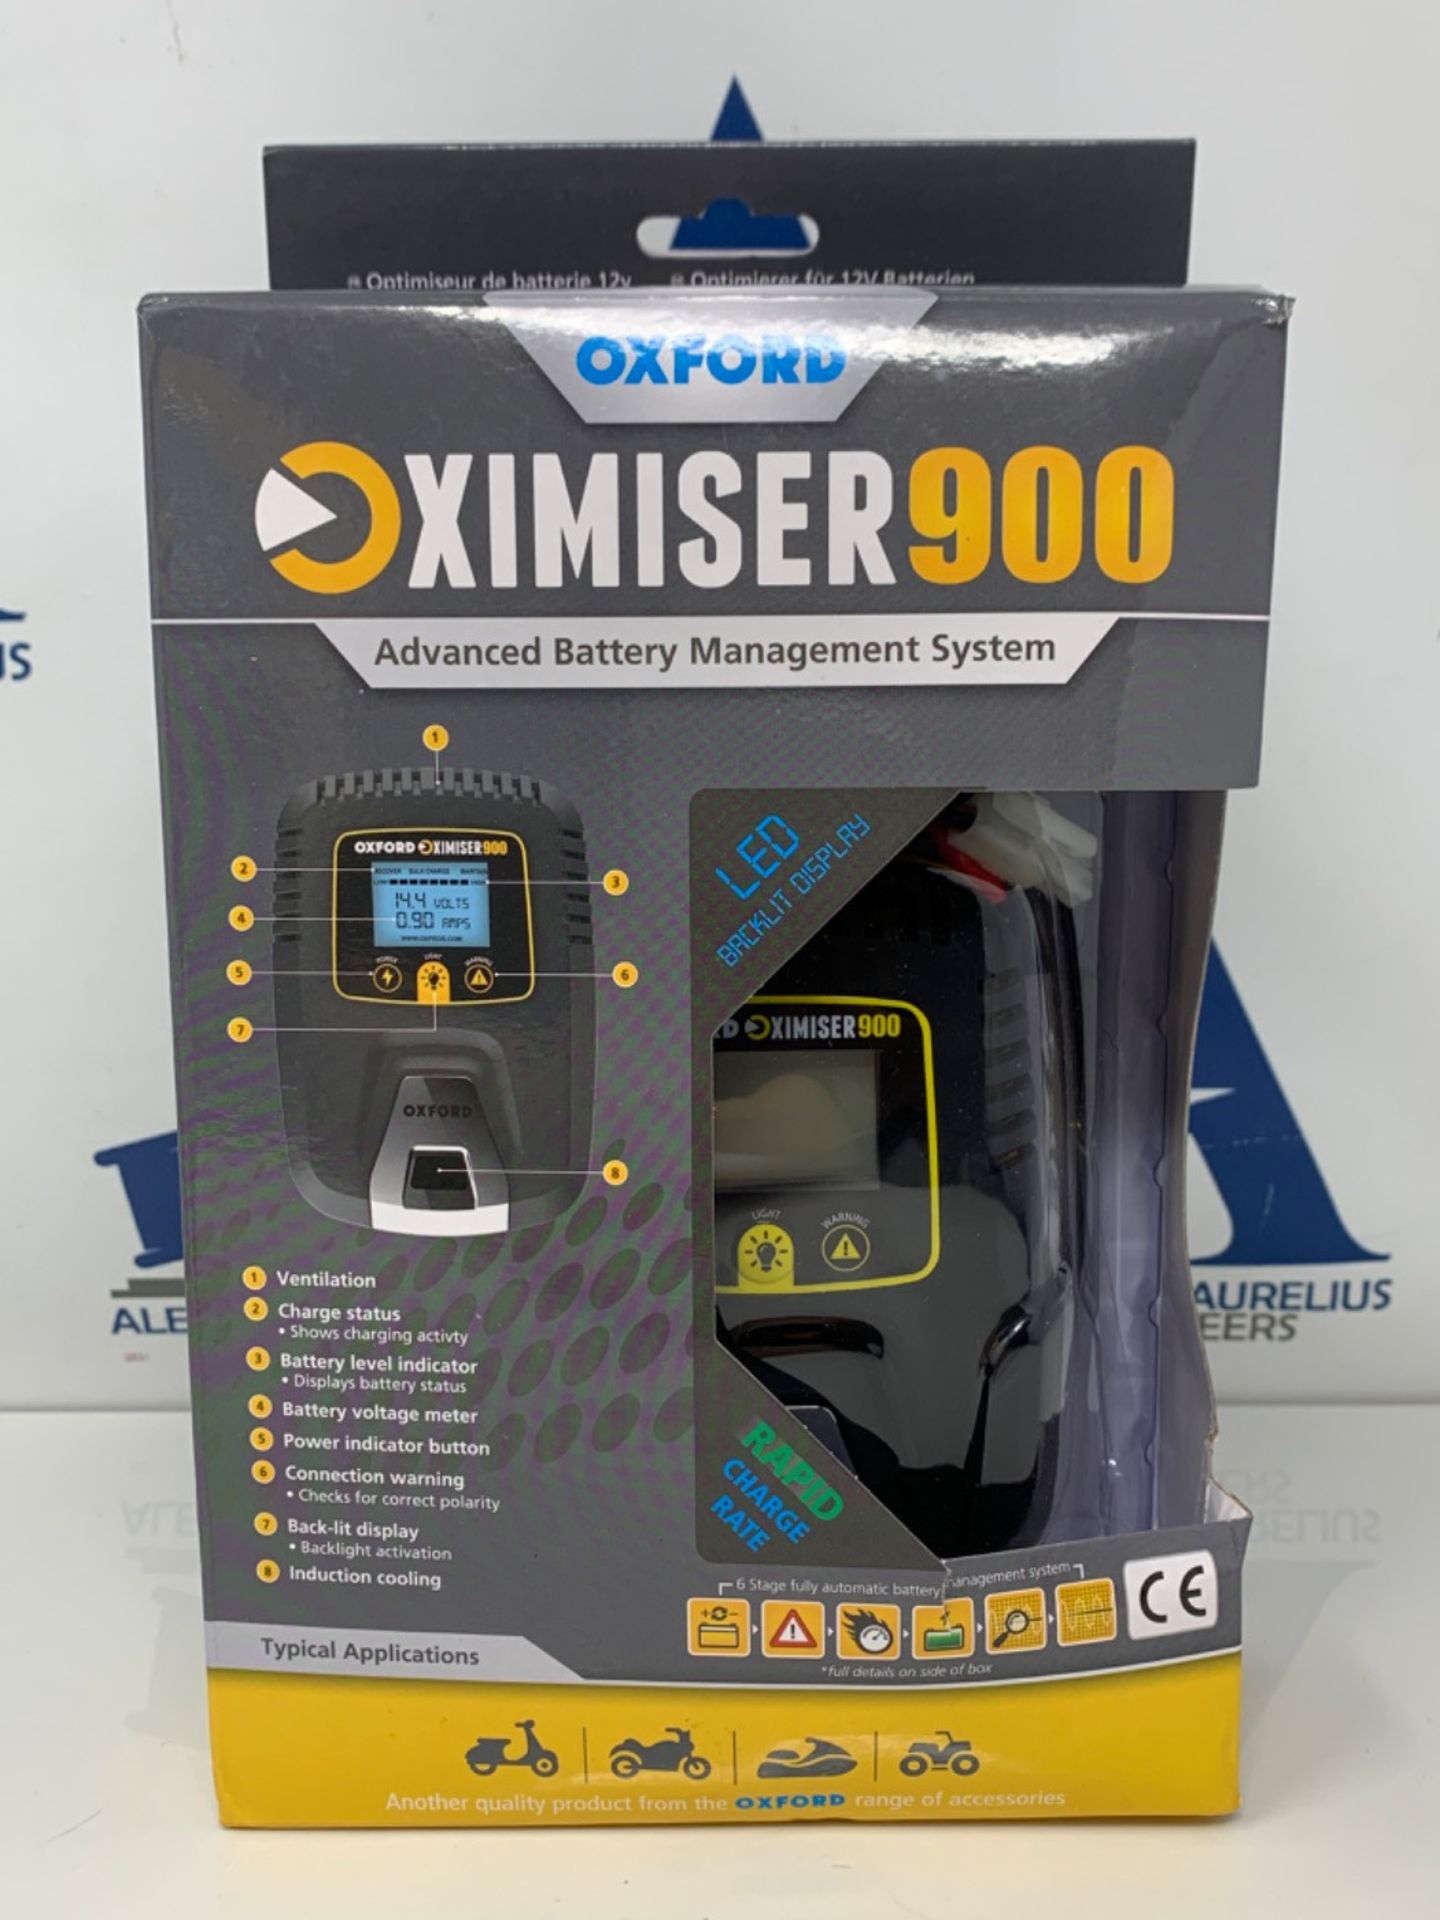 Oxford EL570 Oximiser 900 Essential Battery Management System, Black/Yellow - Image 2 of 3